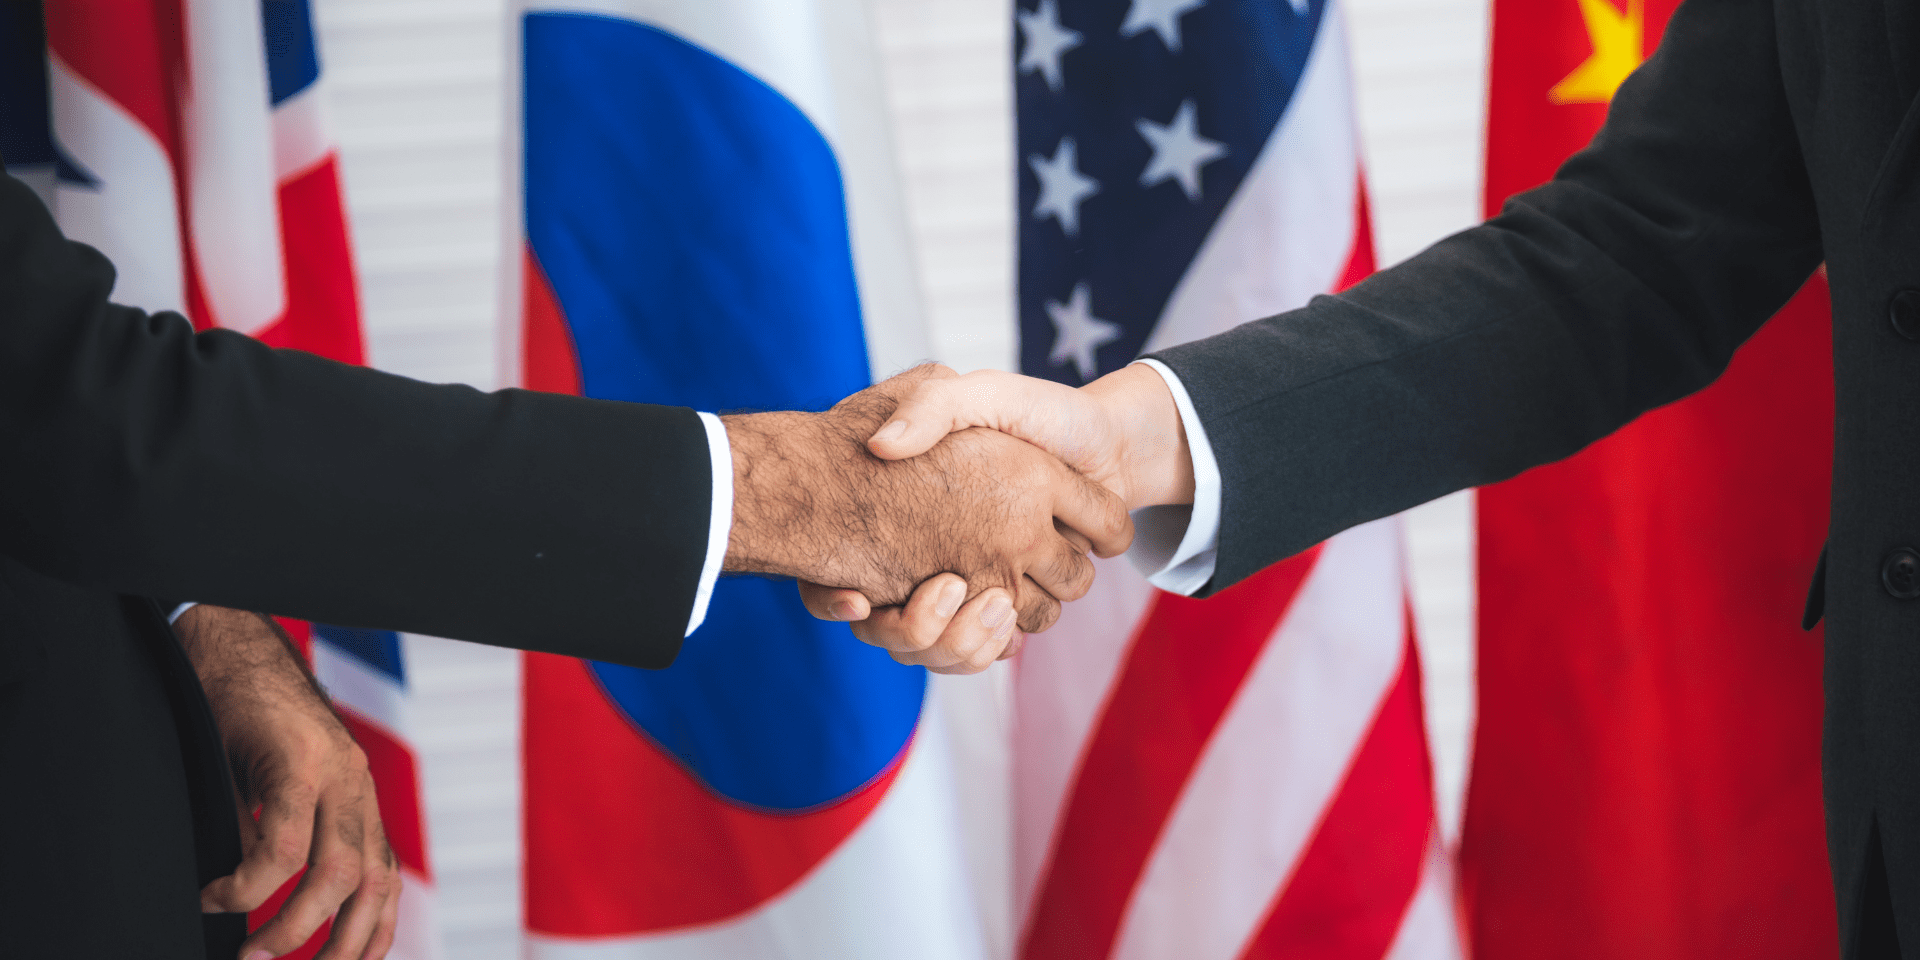 an image of two people shaking hands in front of various country flags